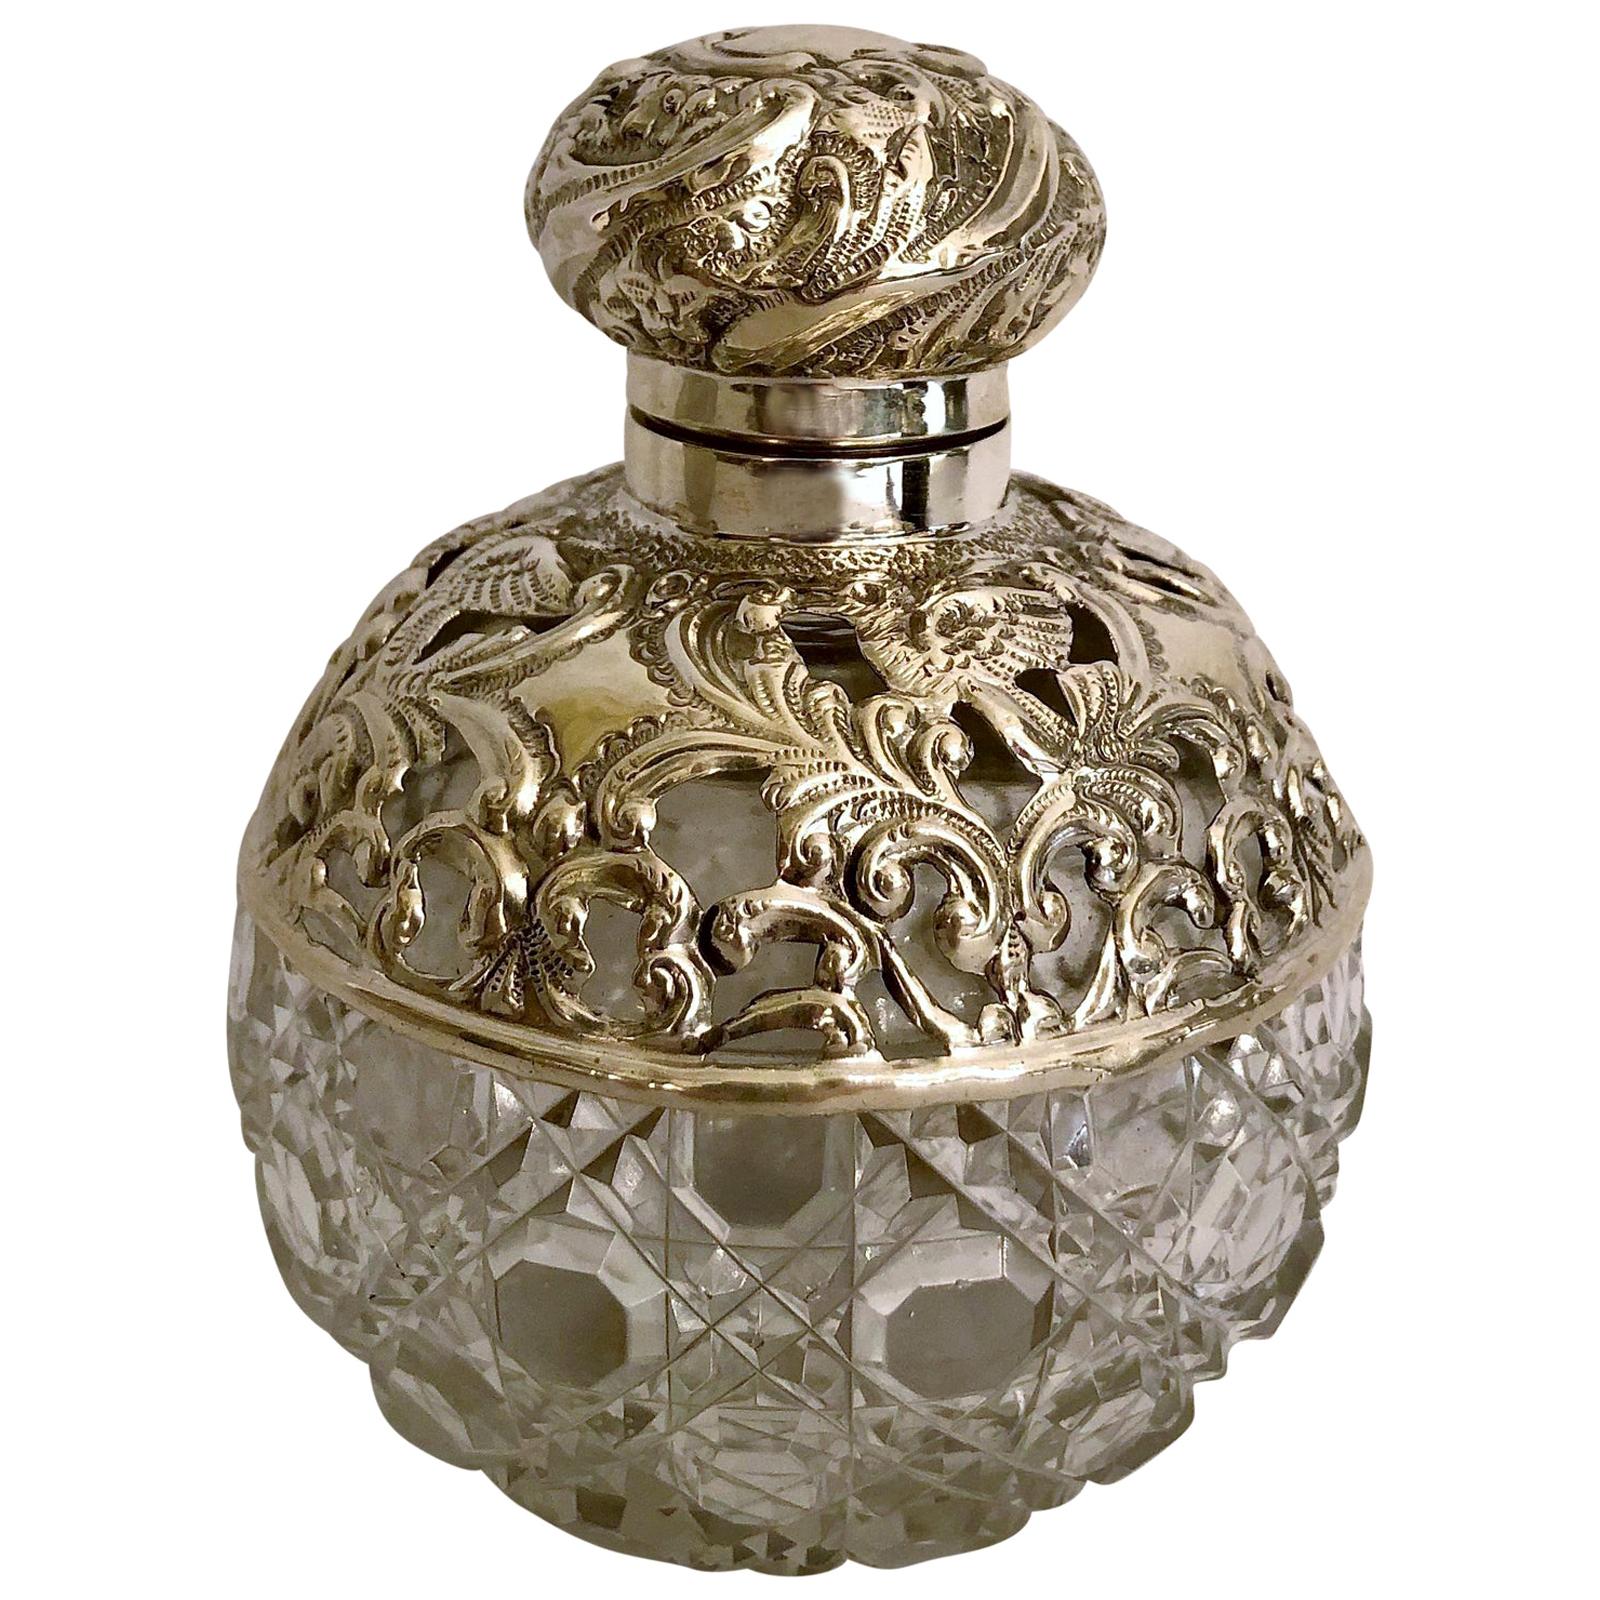 Antique Edwardian Sterling Silver Mounted Cut Crystal Perfume Bottle, circa 1900